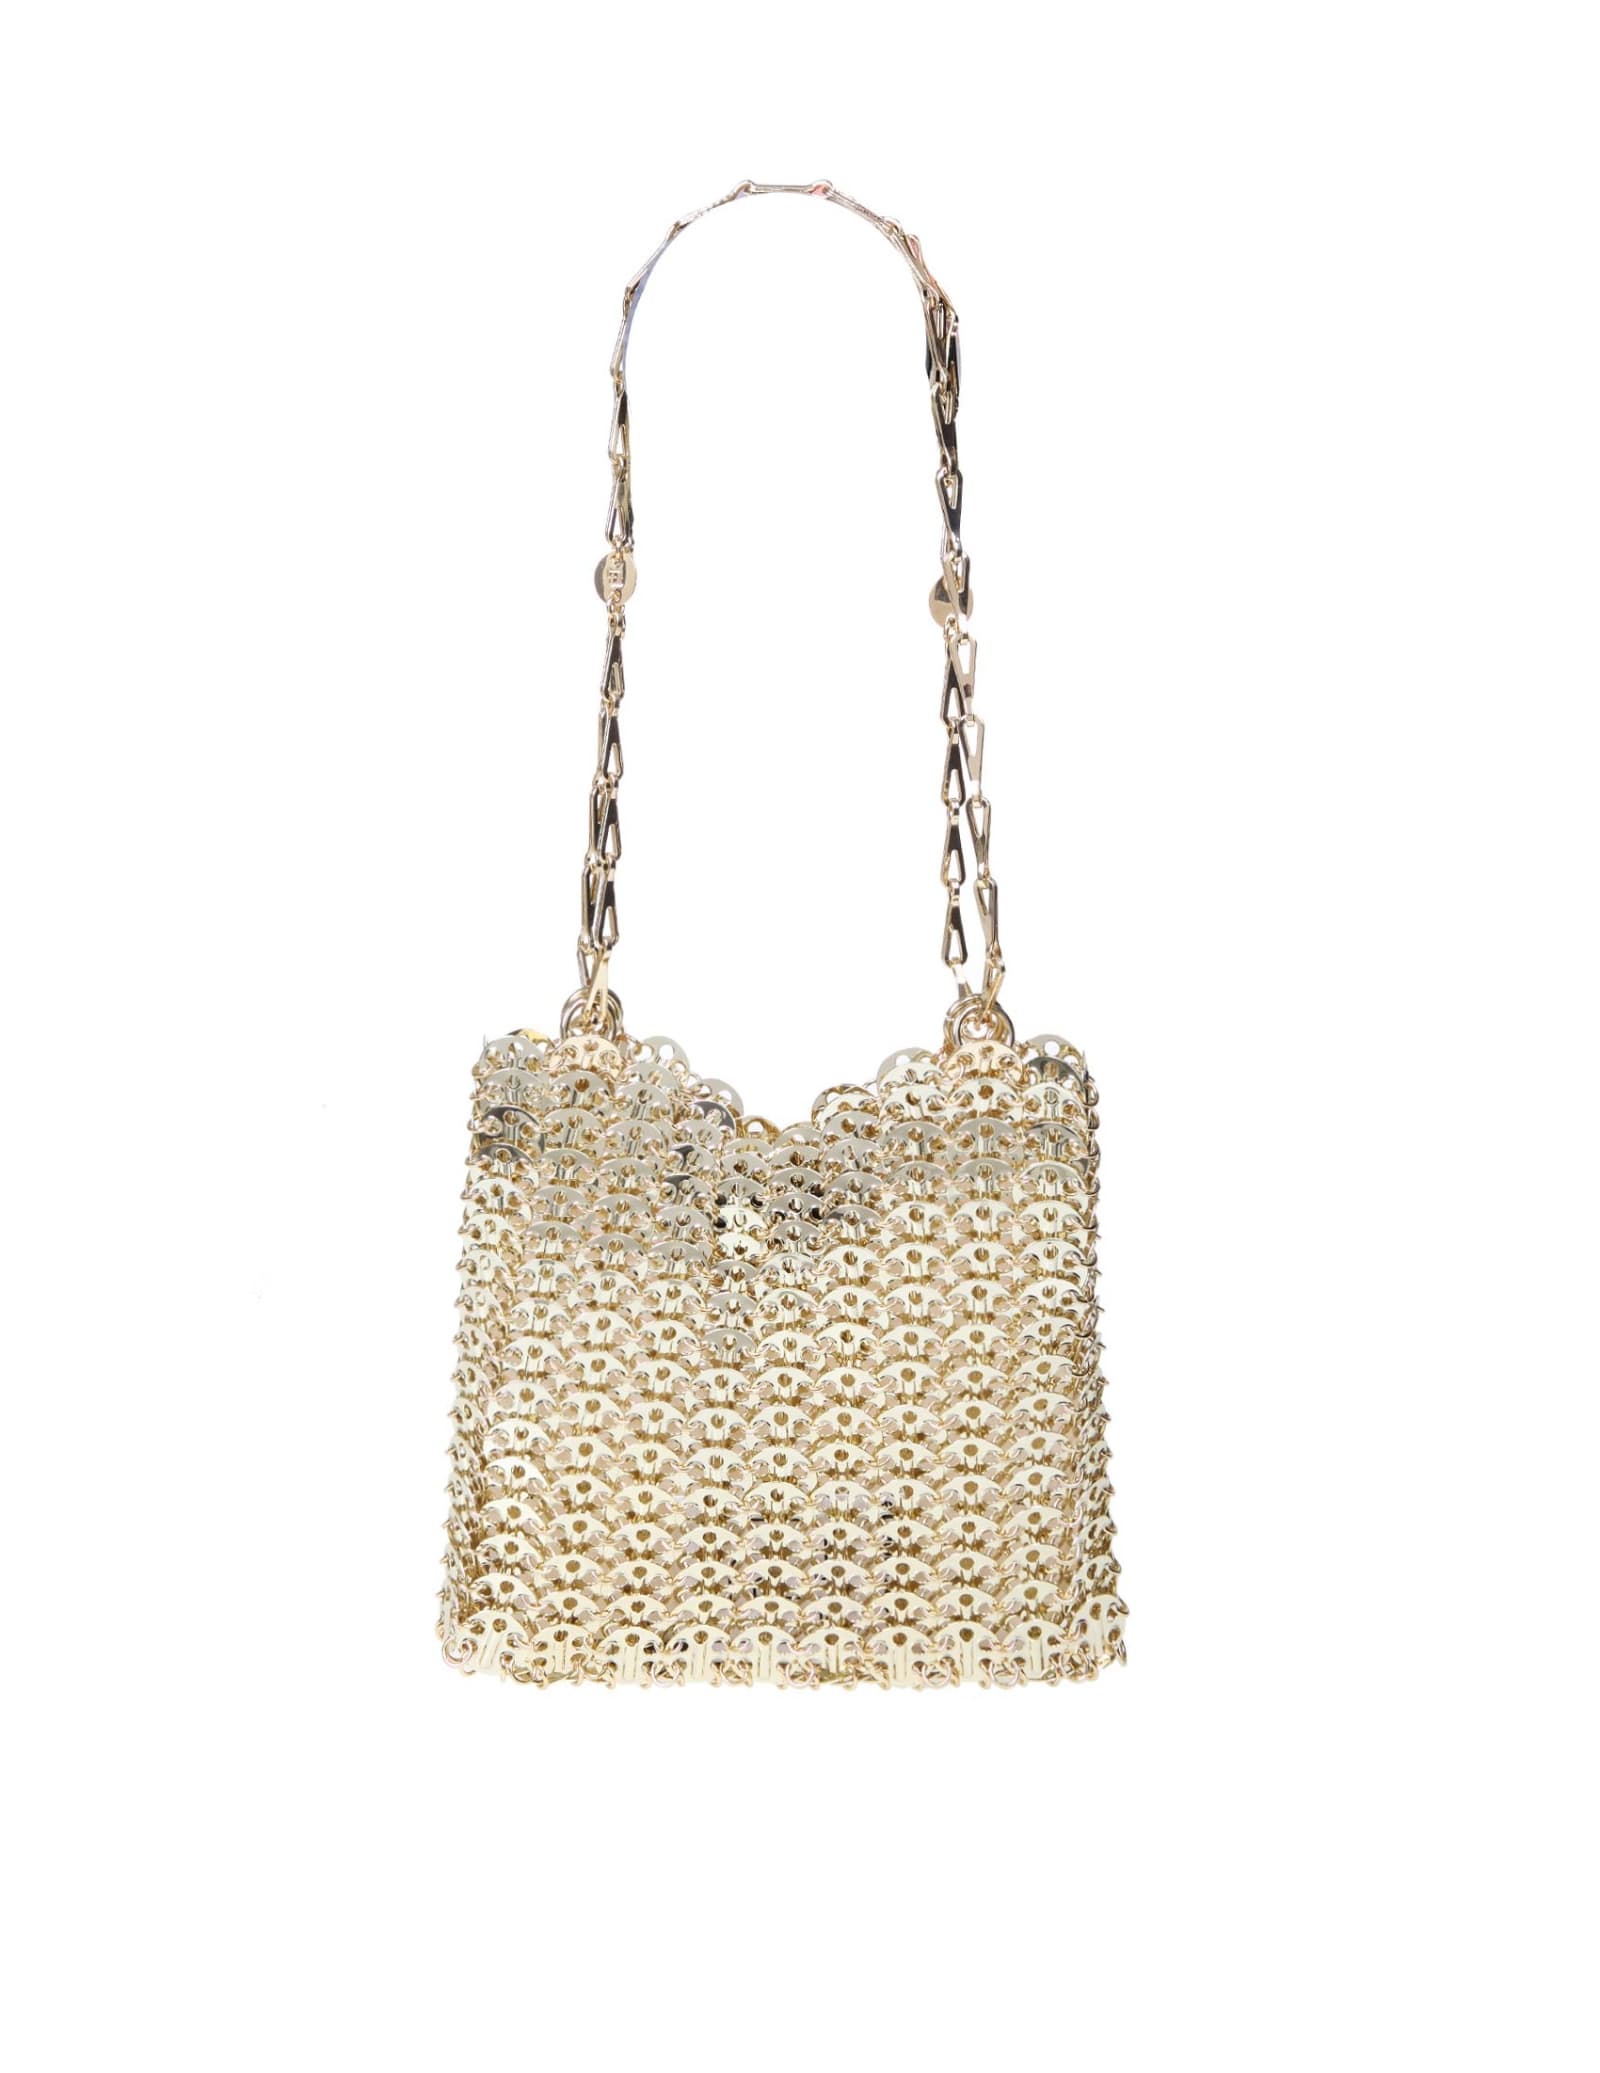 Paco Rabanne 1969 BAG IN BRASS GOLD COLOR